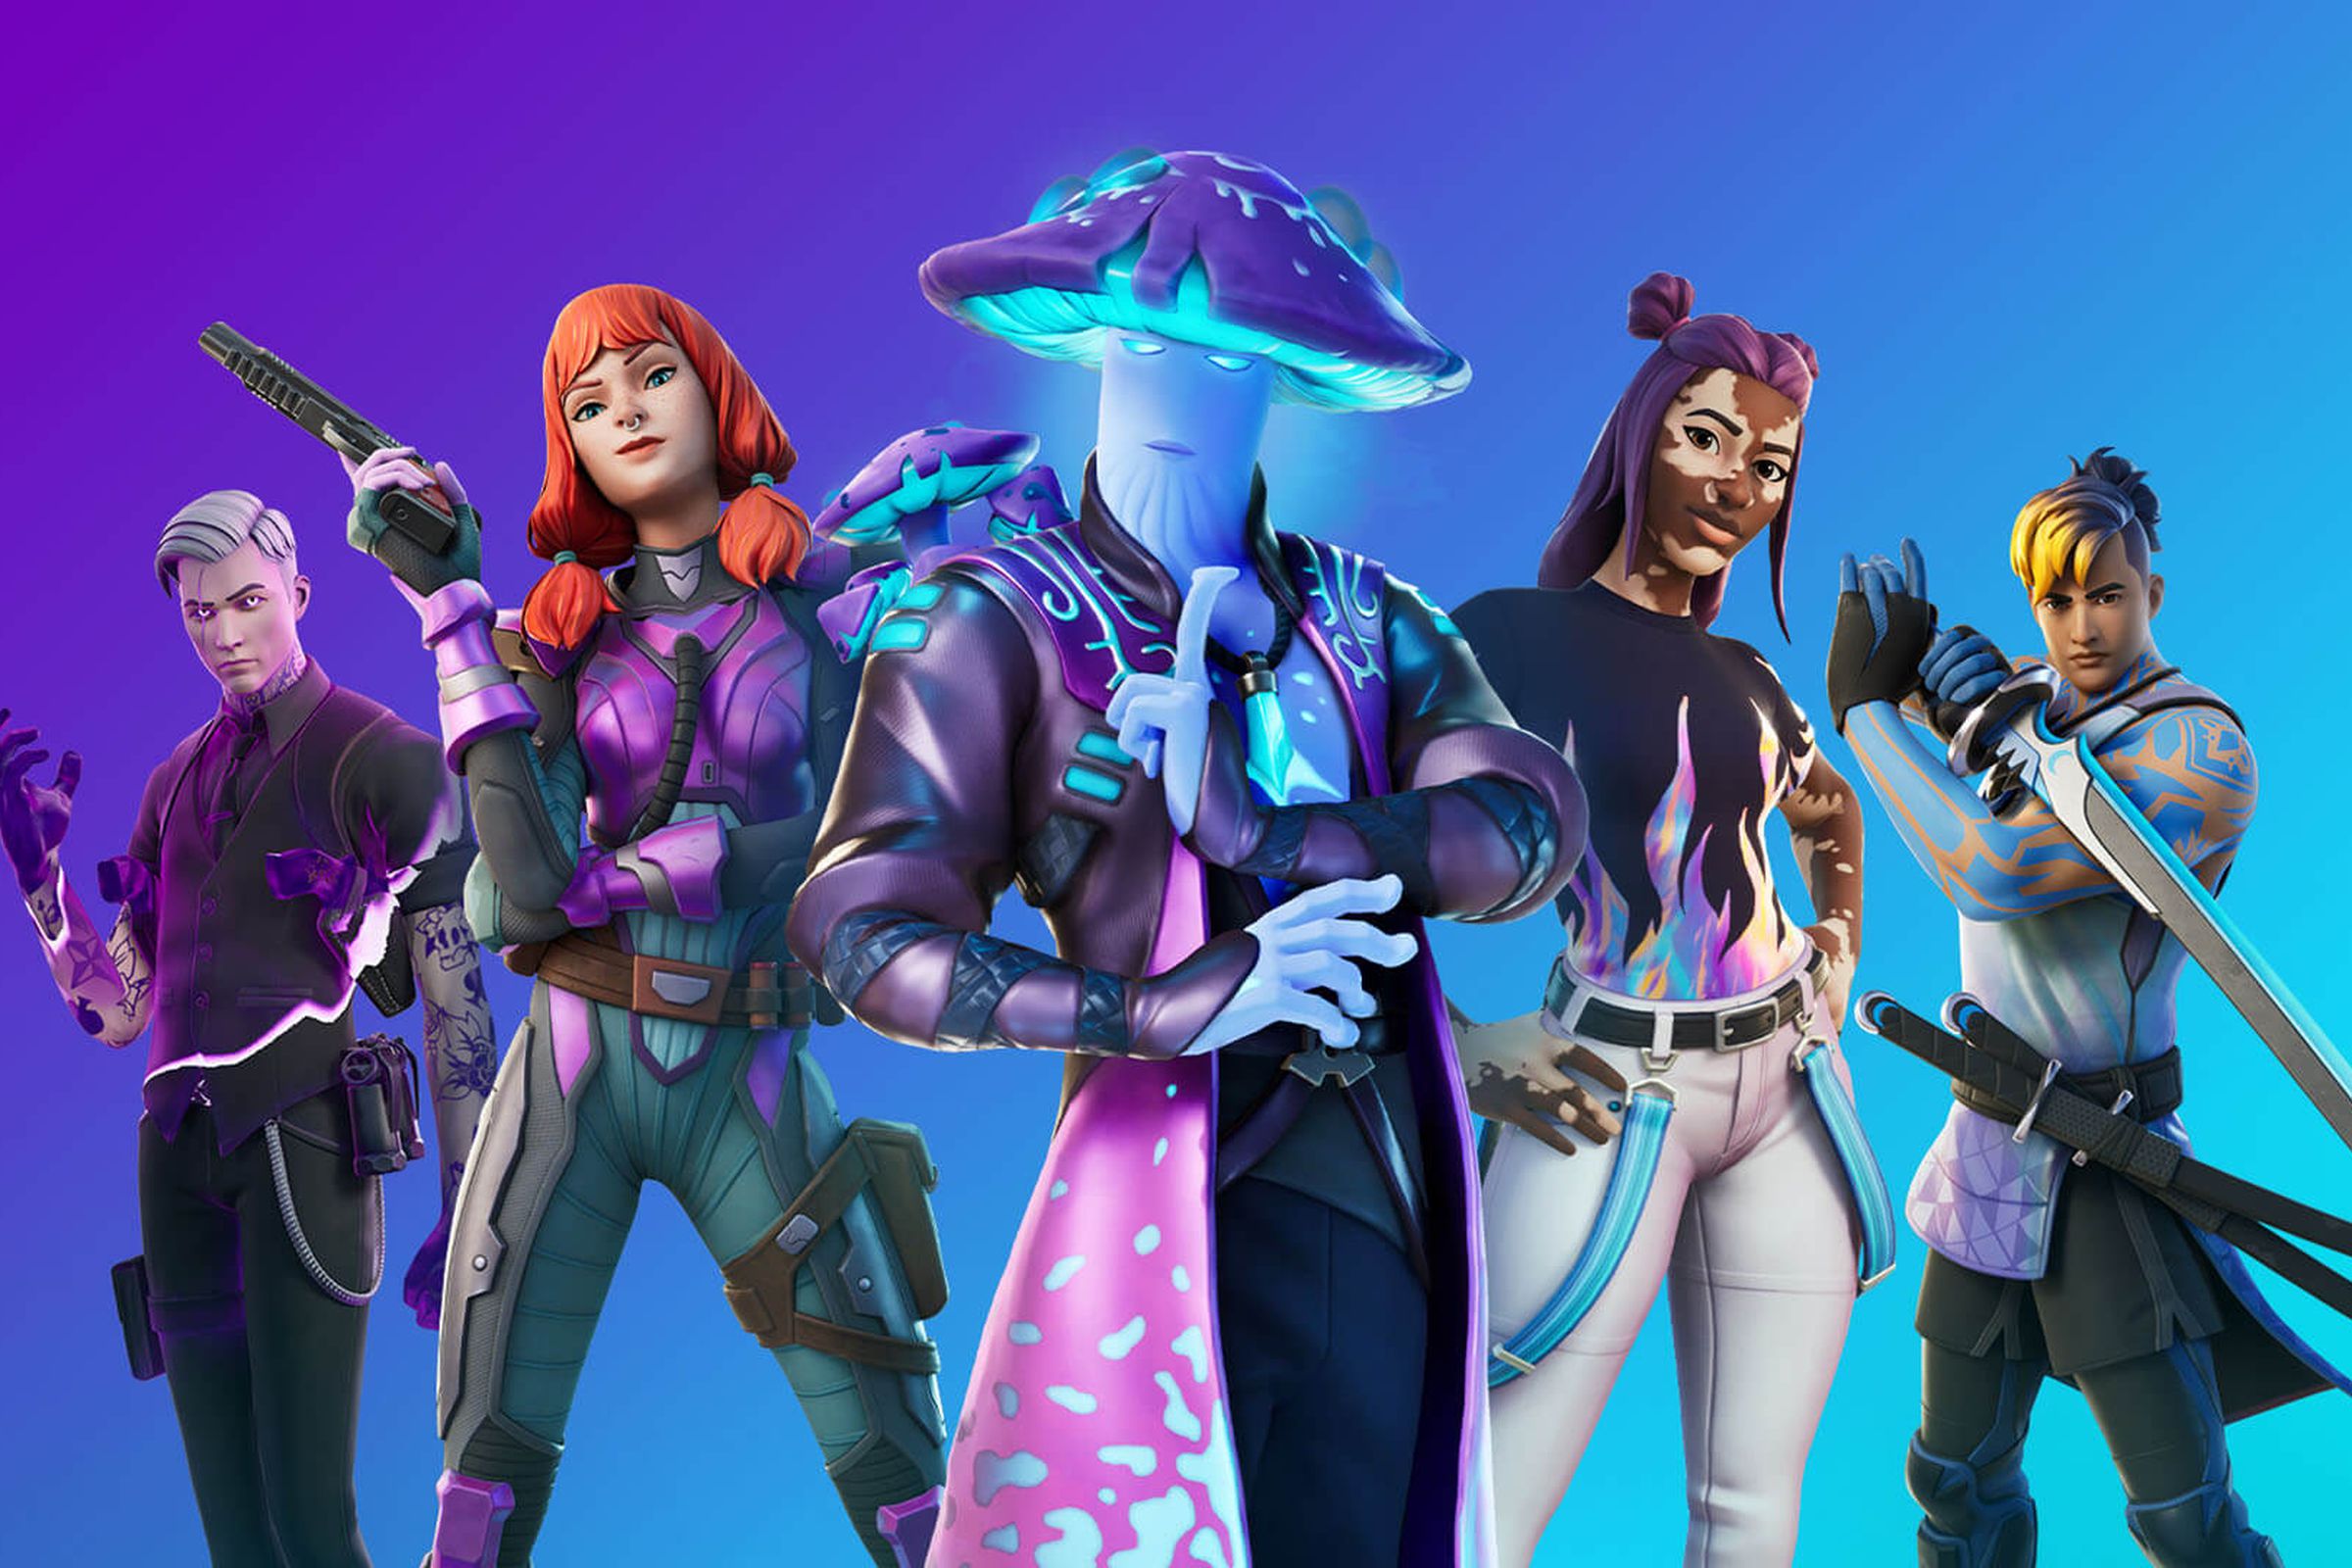 Five characters from Fortnite.